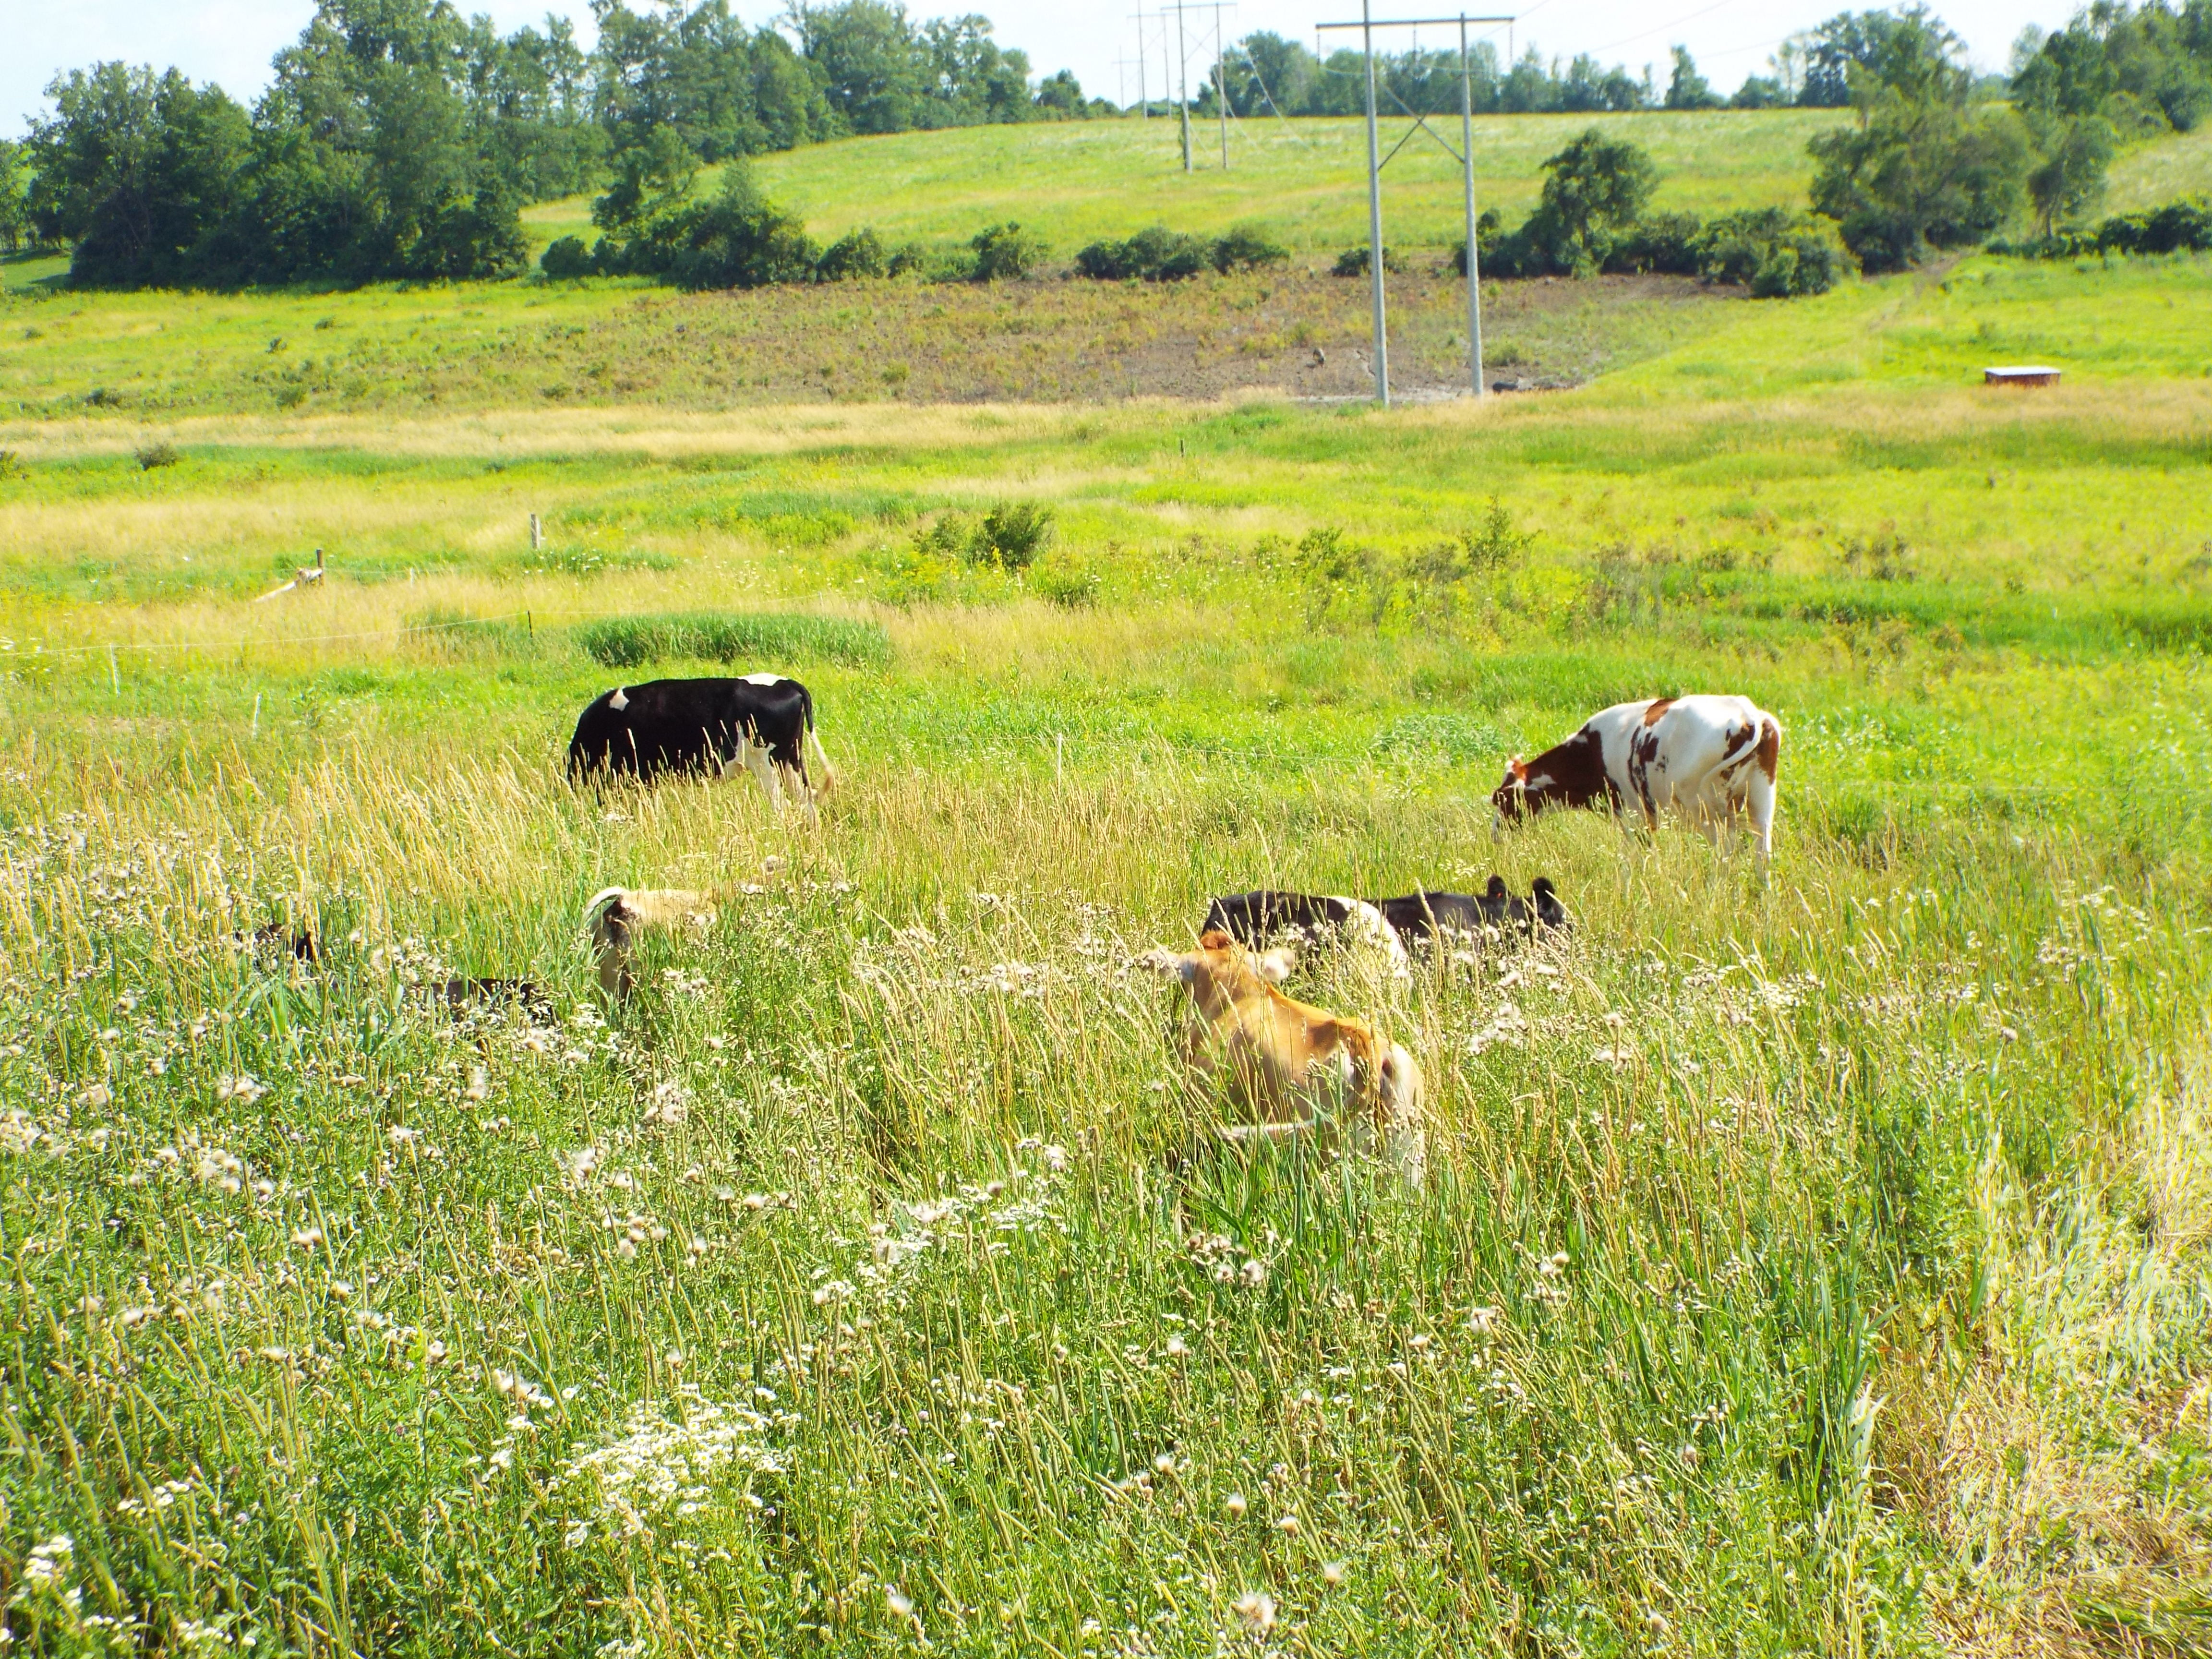 The background shows the pigs' progress through the pasture.